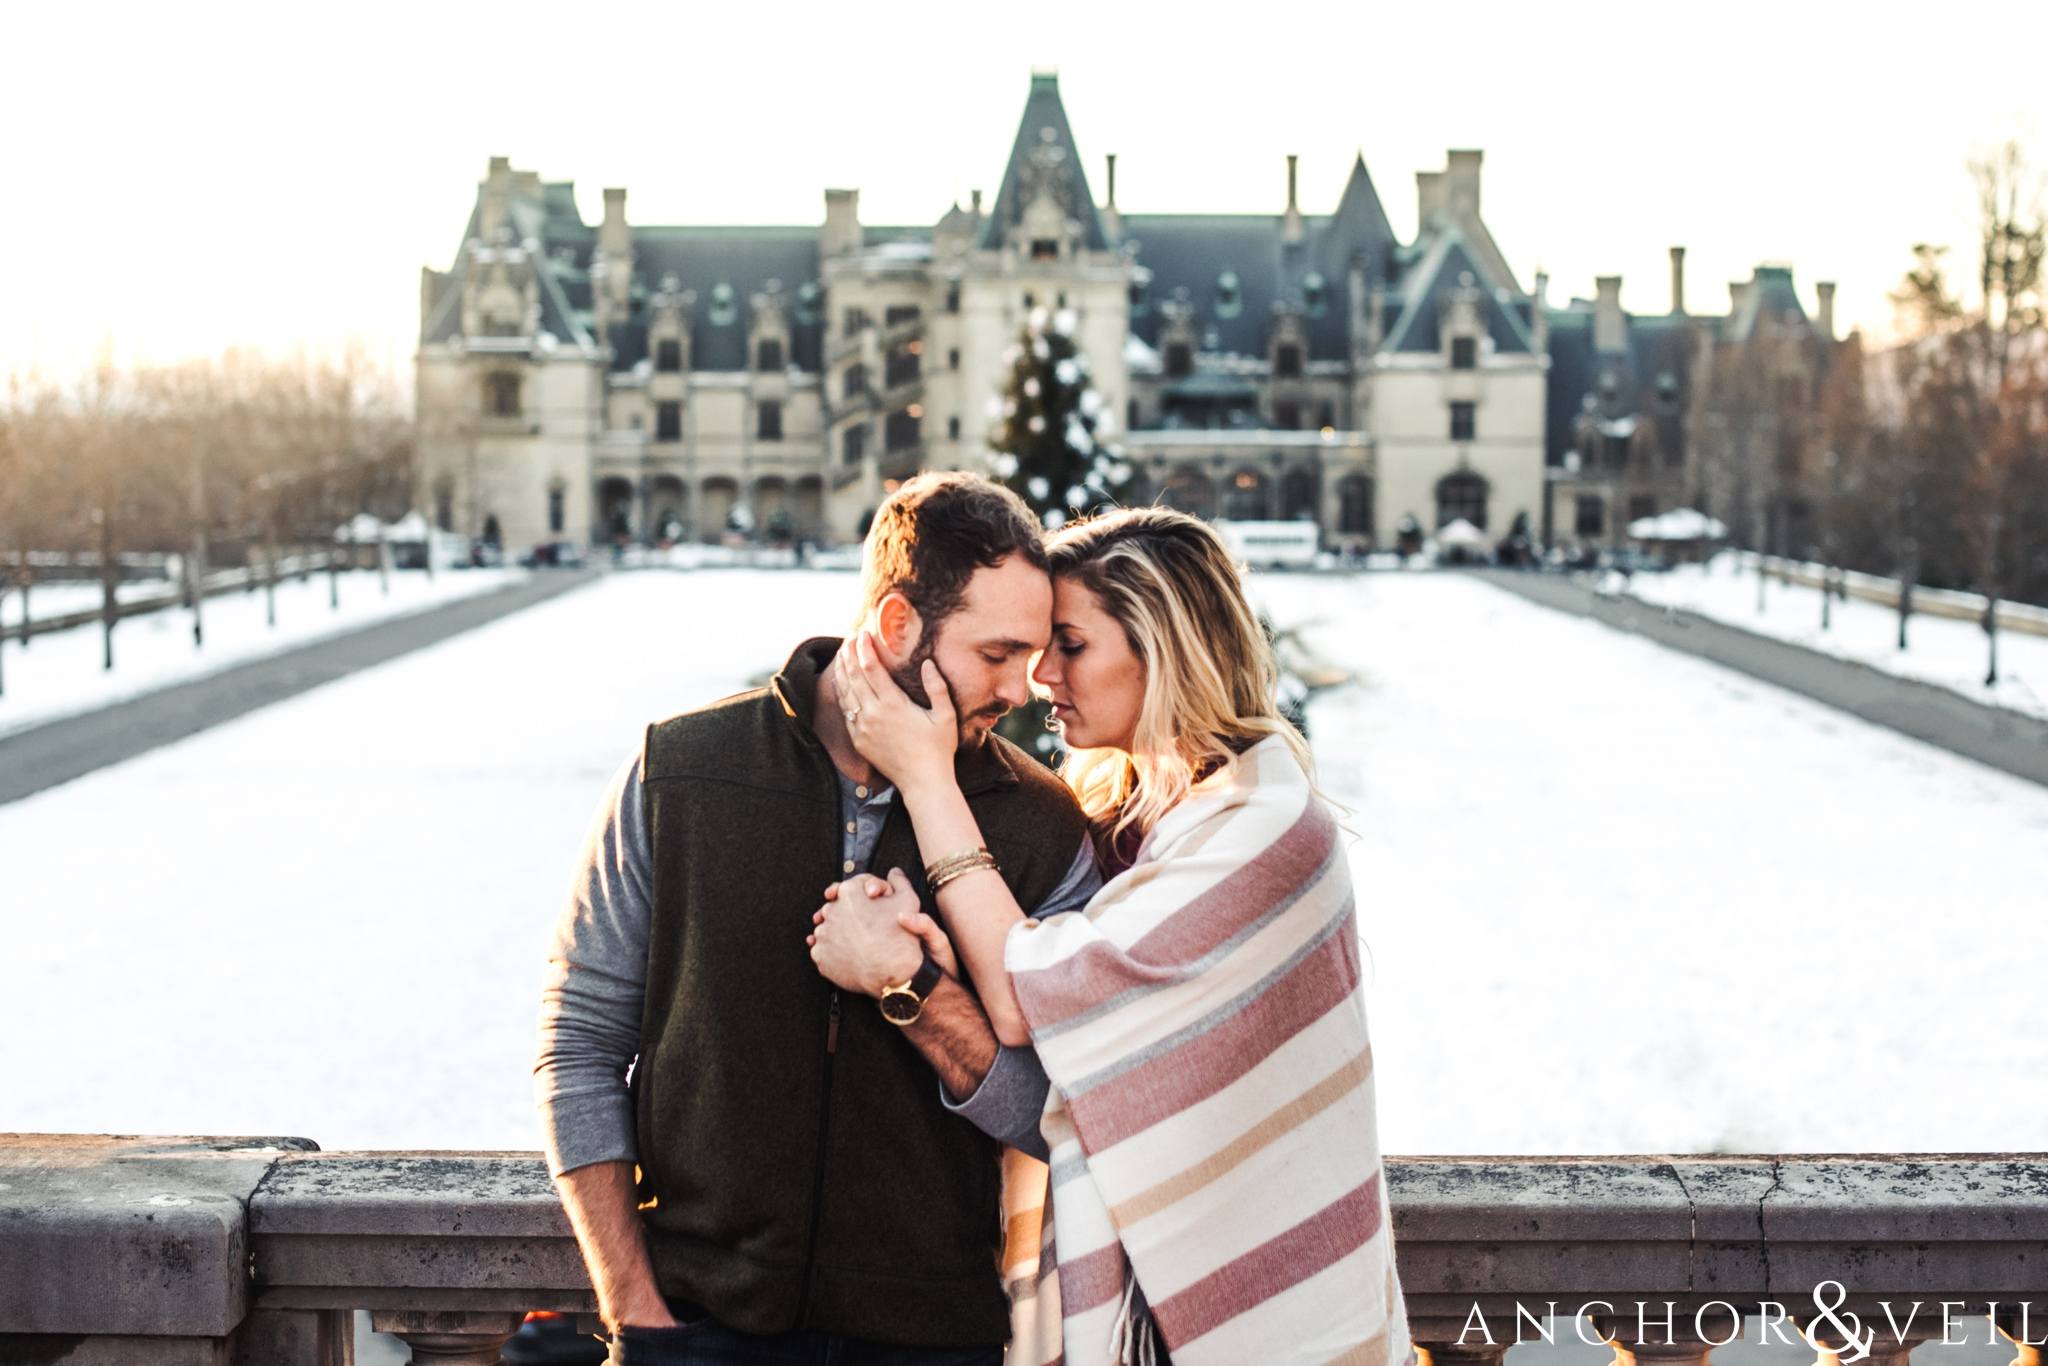 holding each other in front of the house during their Snowy Biltmore Engagement Session